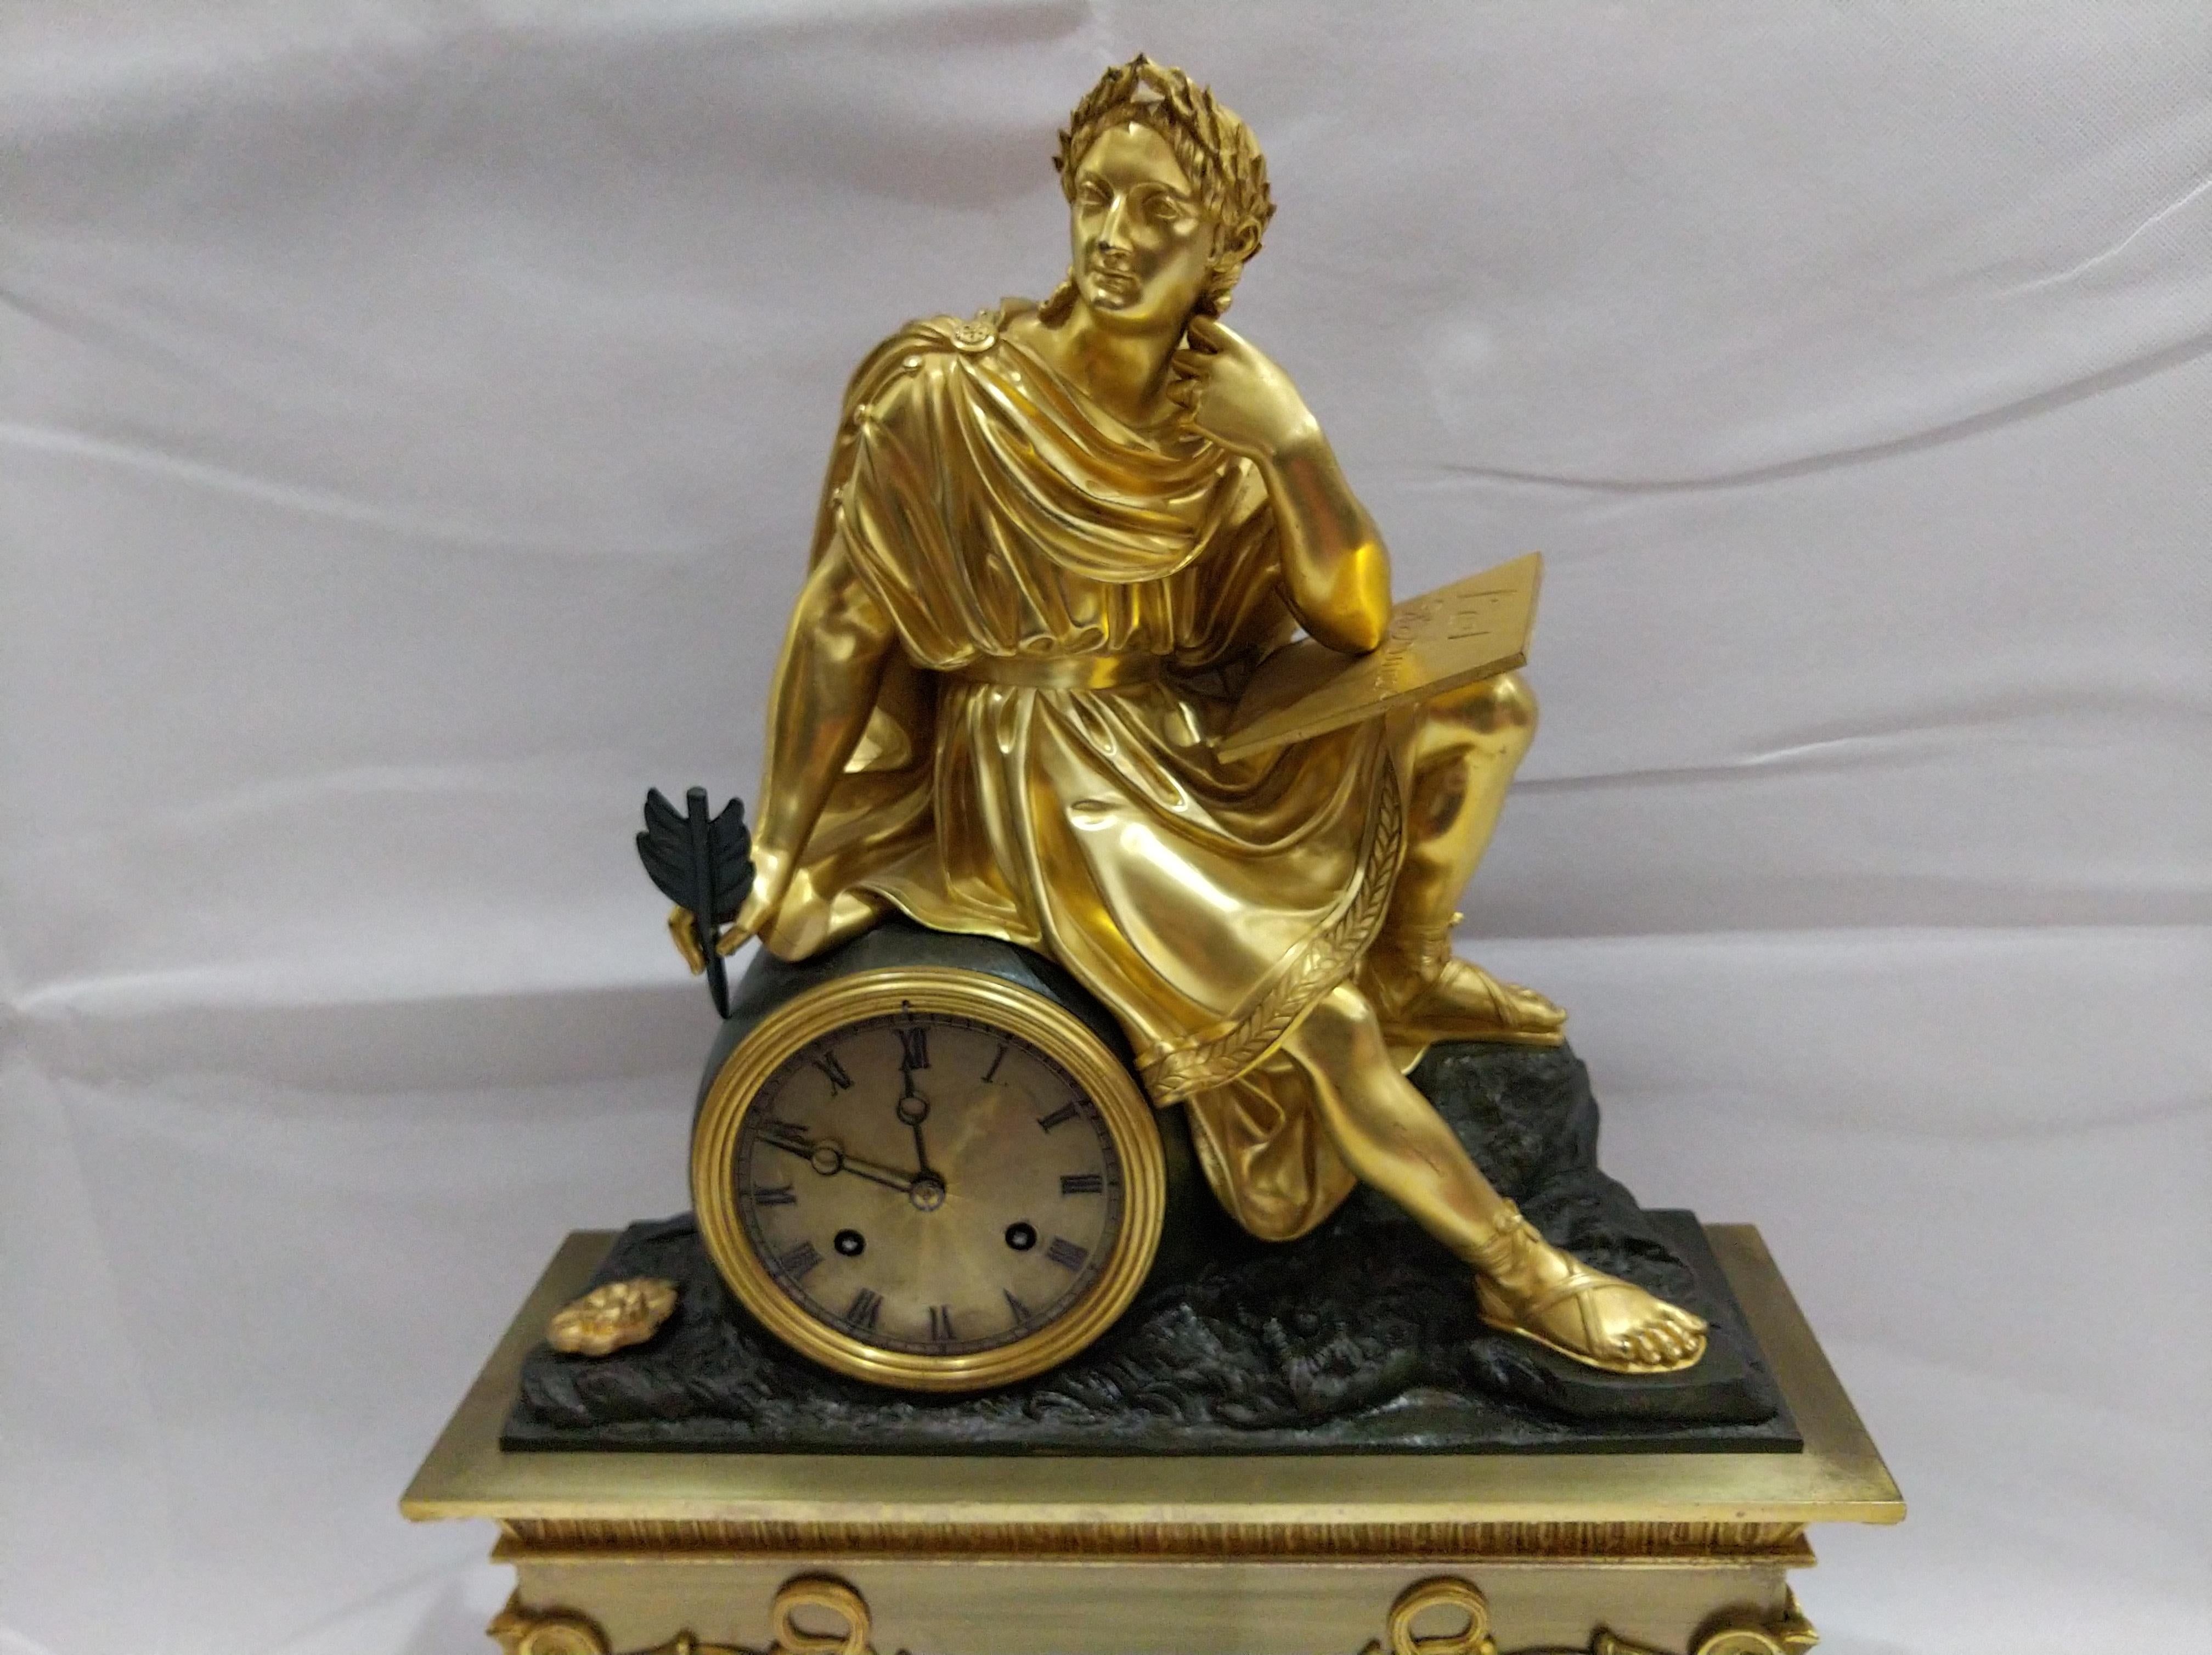 Empire gilded pendulum clock with Ovid (Roman poet who lived during the reign of Augustus) sitting on the dial writing 